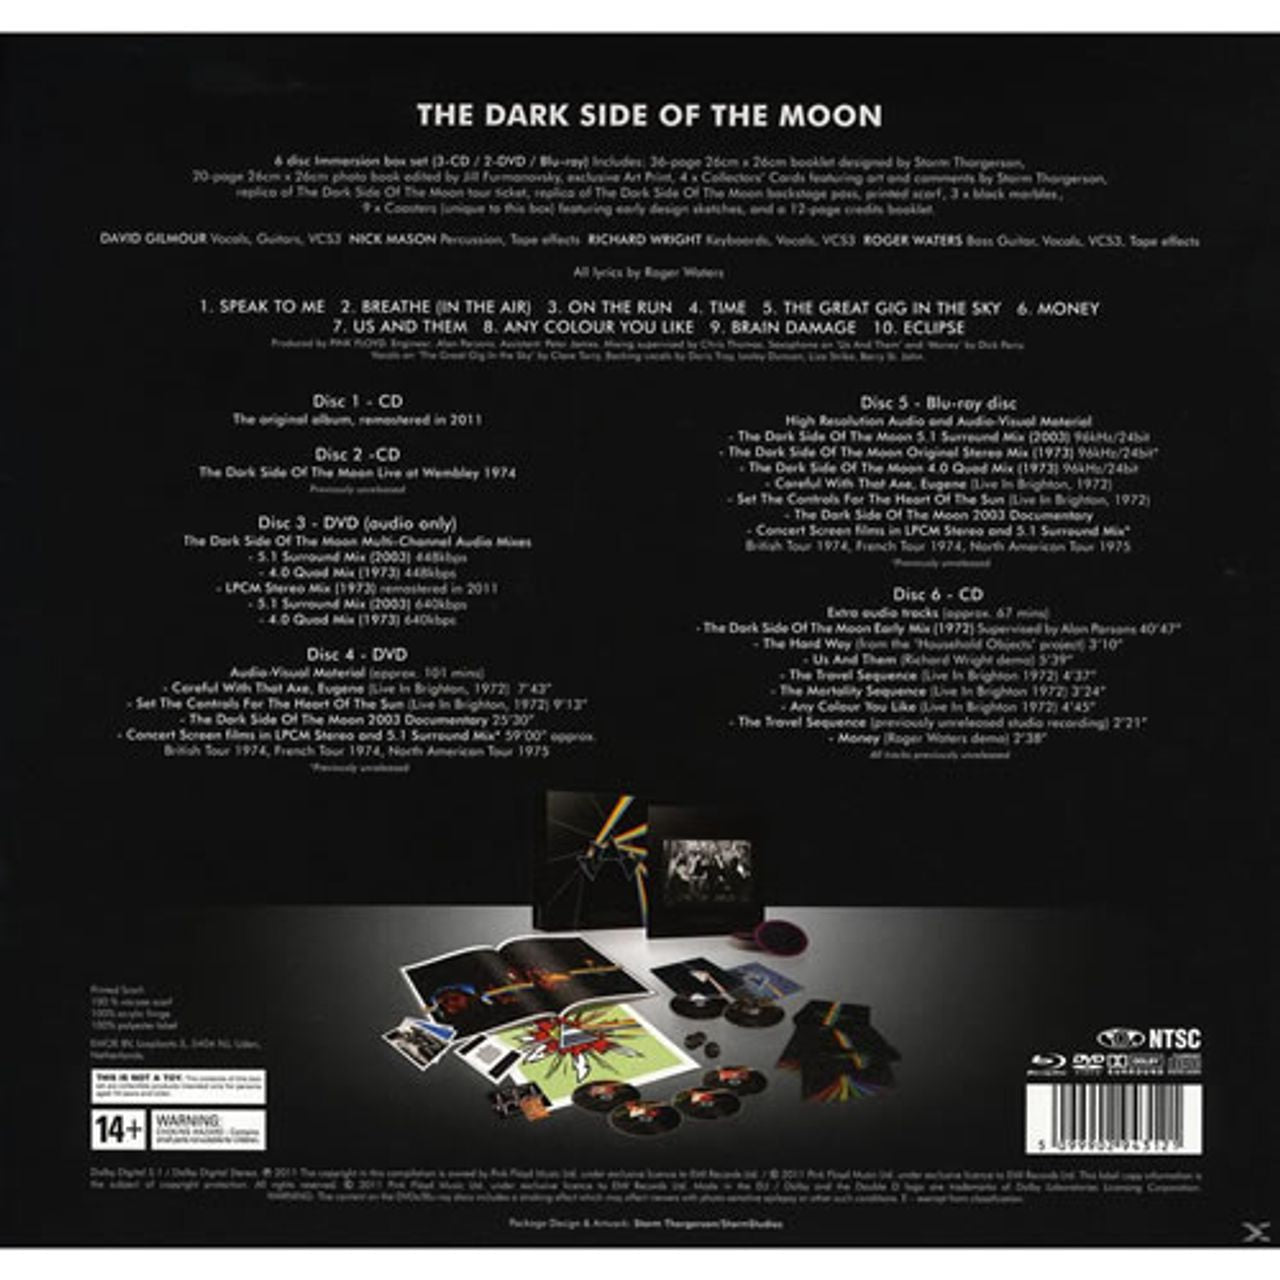 Pink Floyd The Dark Side Of The Moon - Immersion Box UK Box set